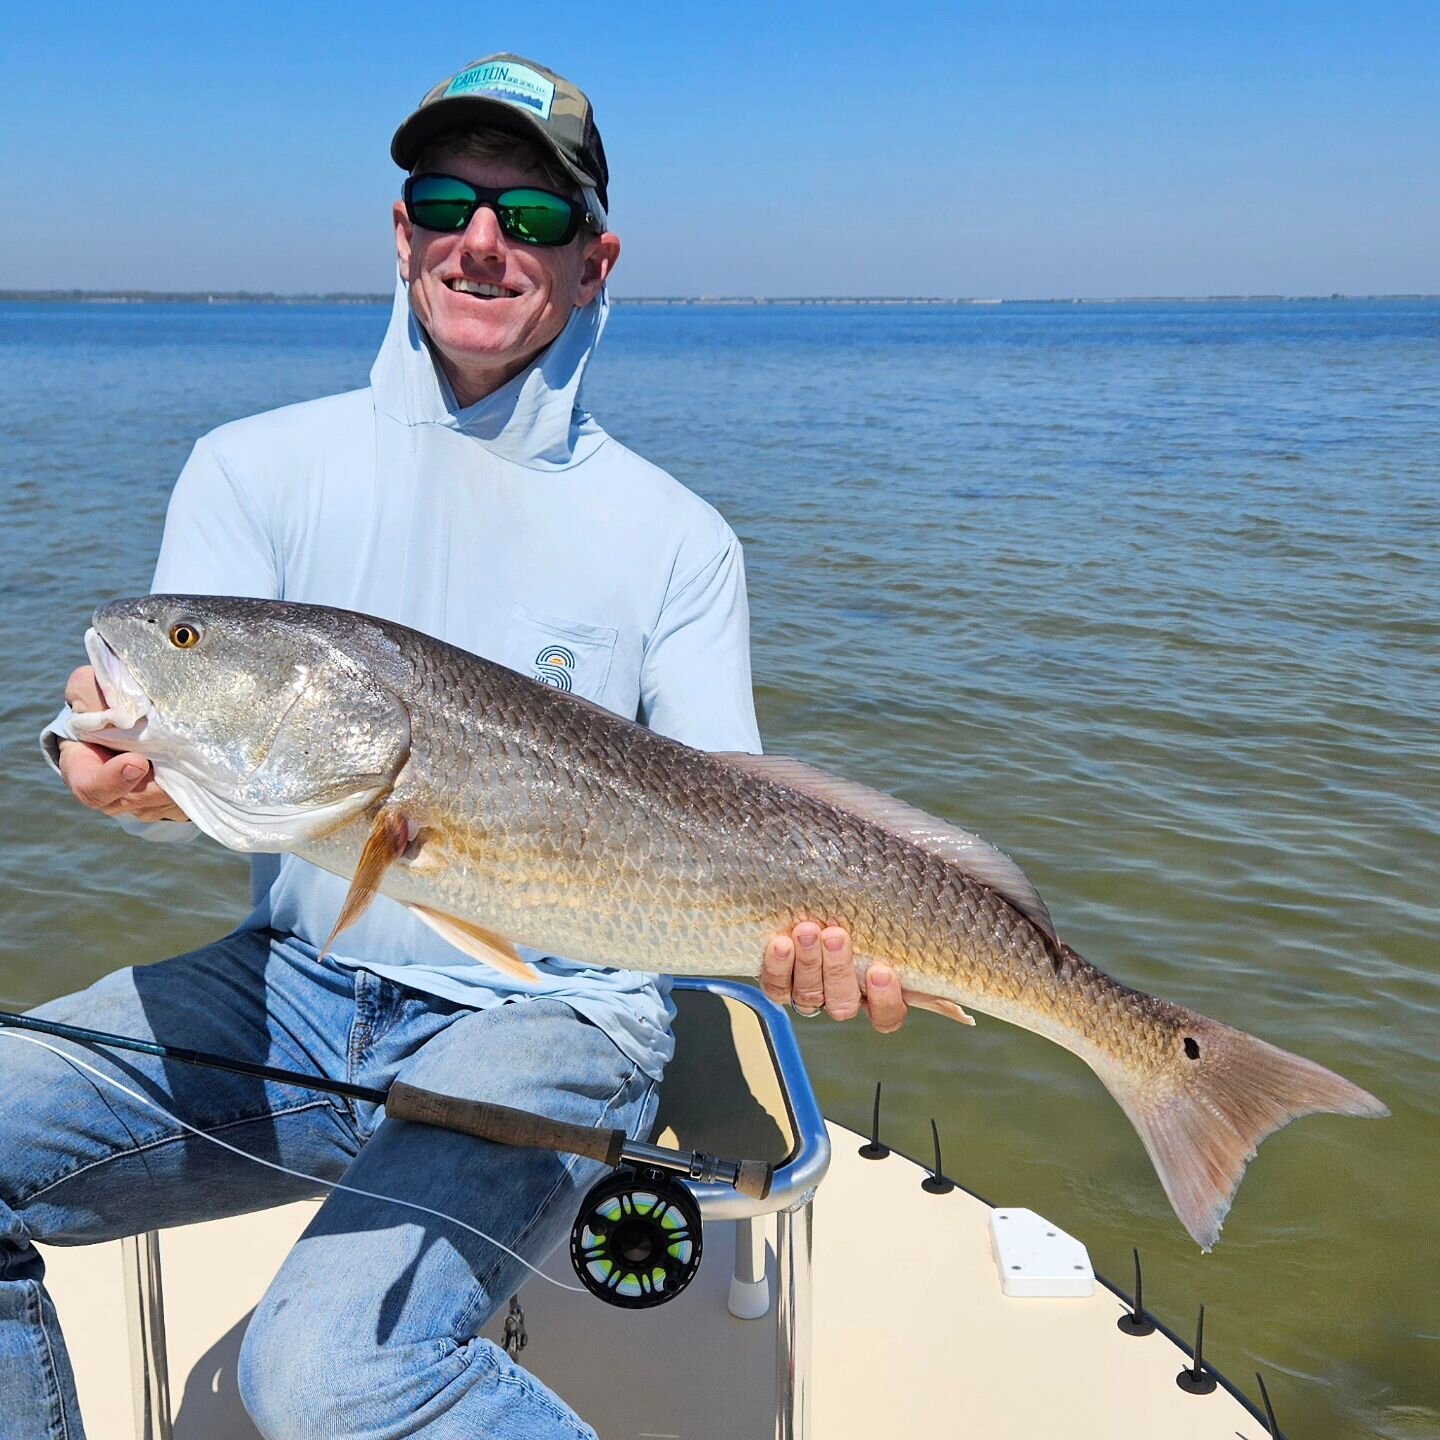 Travis with a quality #redfishonfly today.